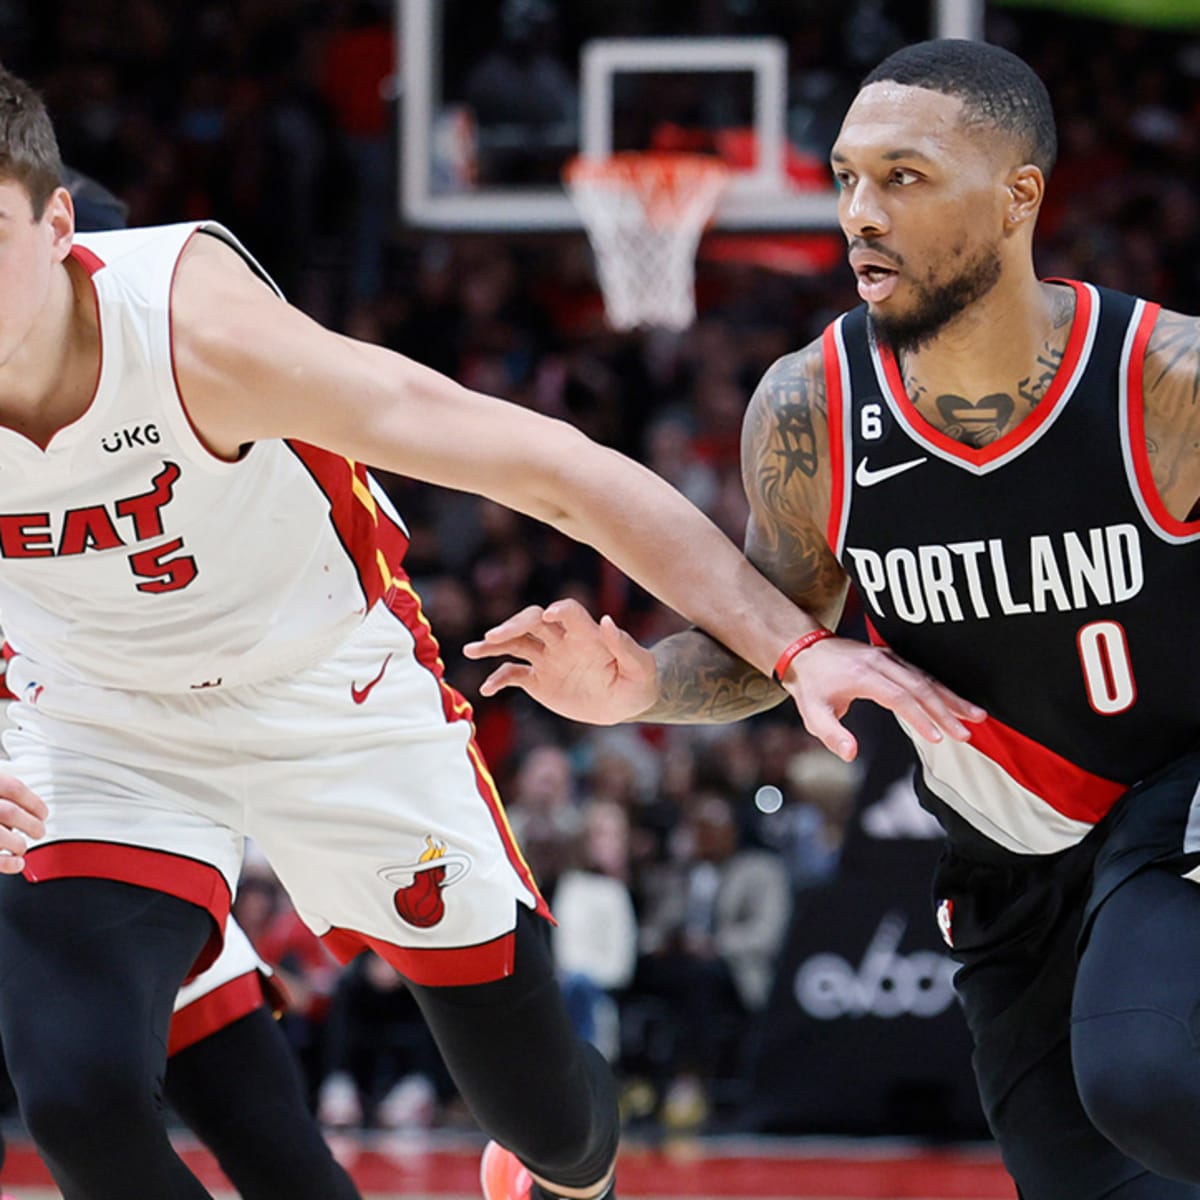 Miami Heat players dealing with Damian Lillard speculation